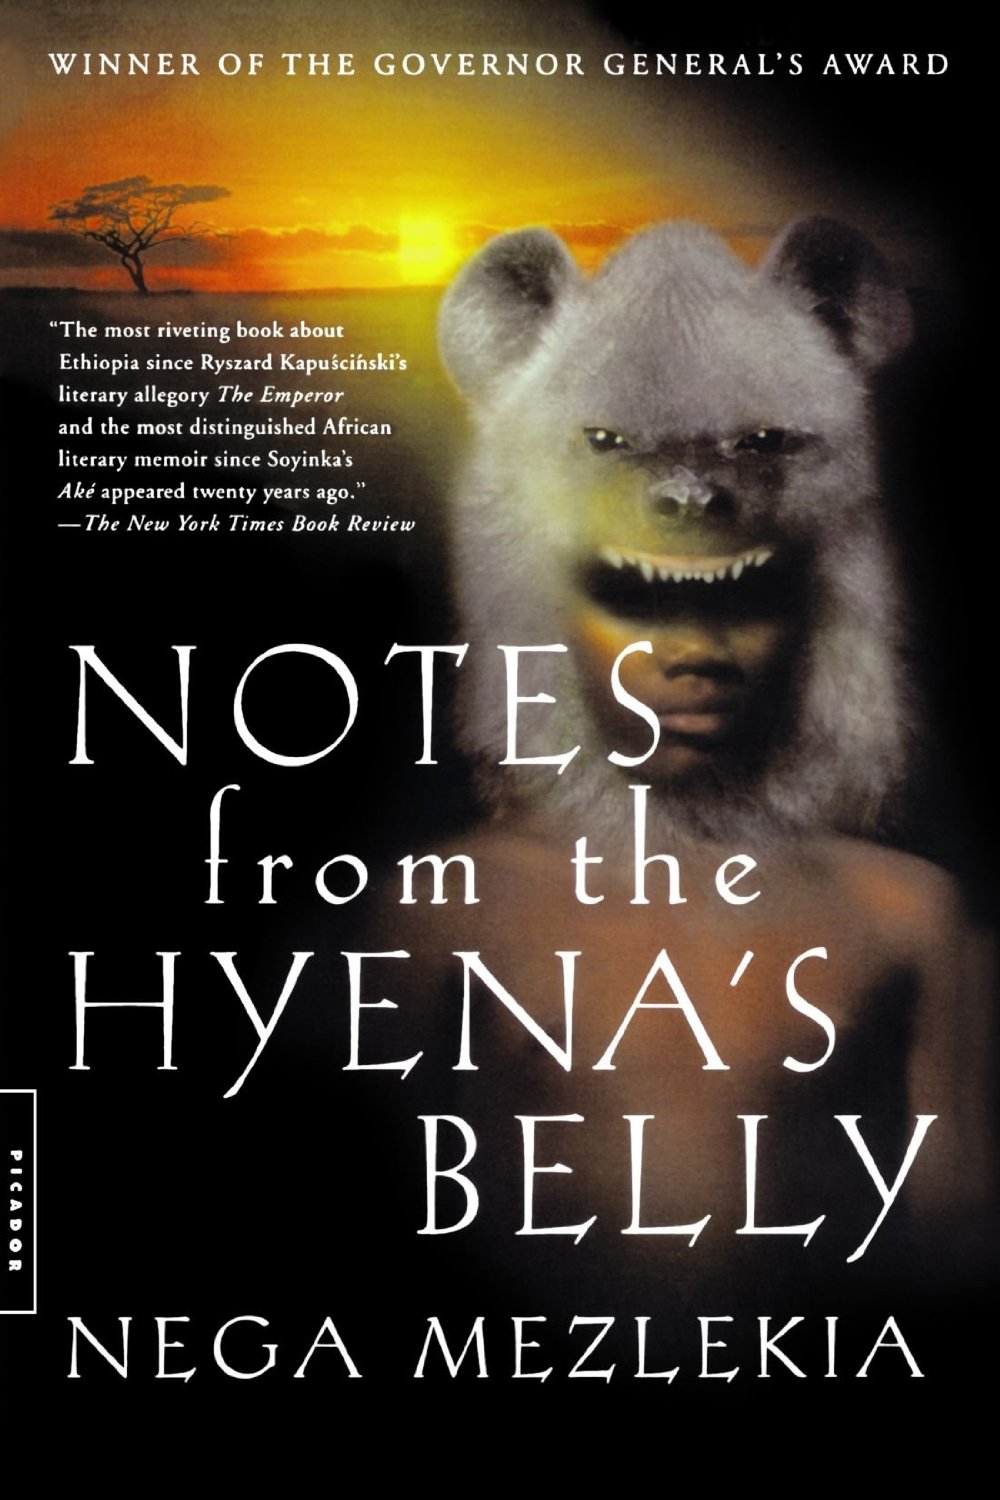 Notes from the Hyena's Belly.jpg